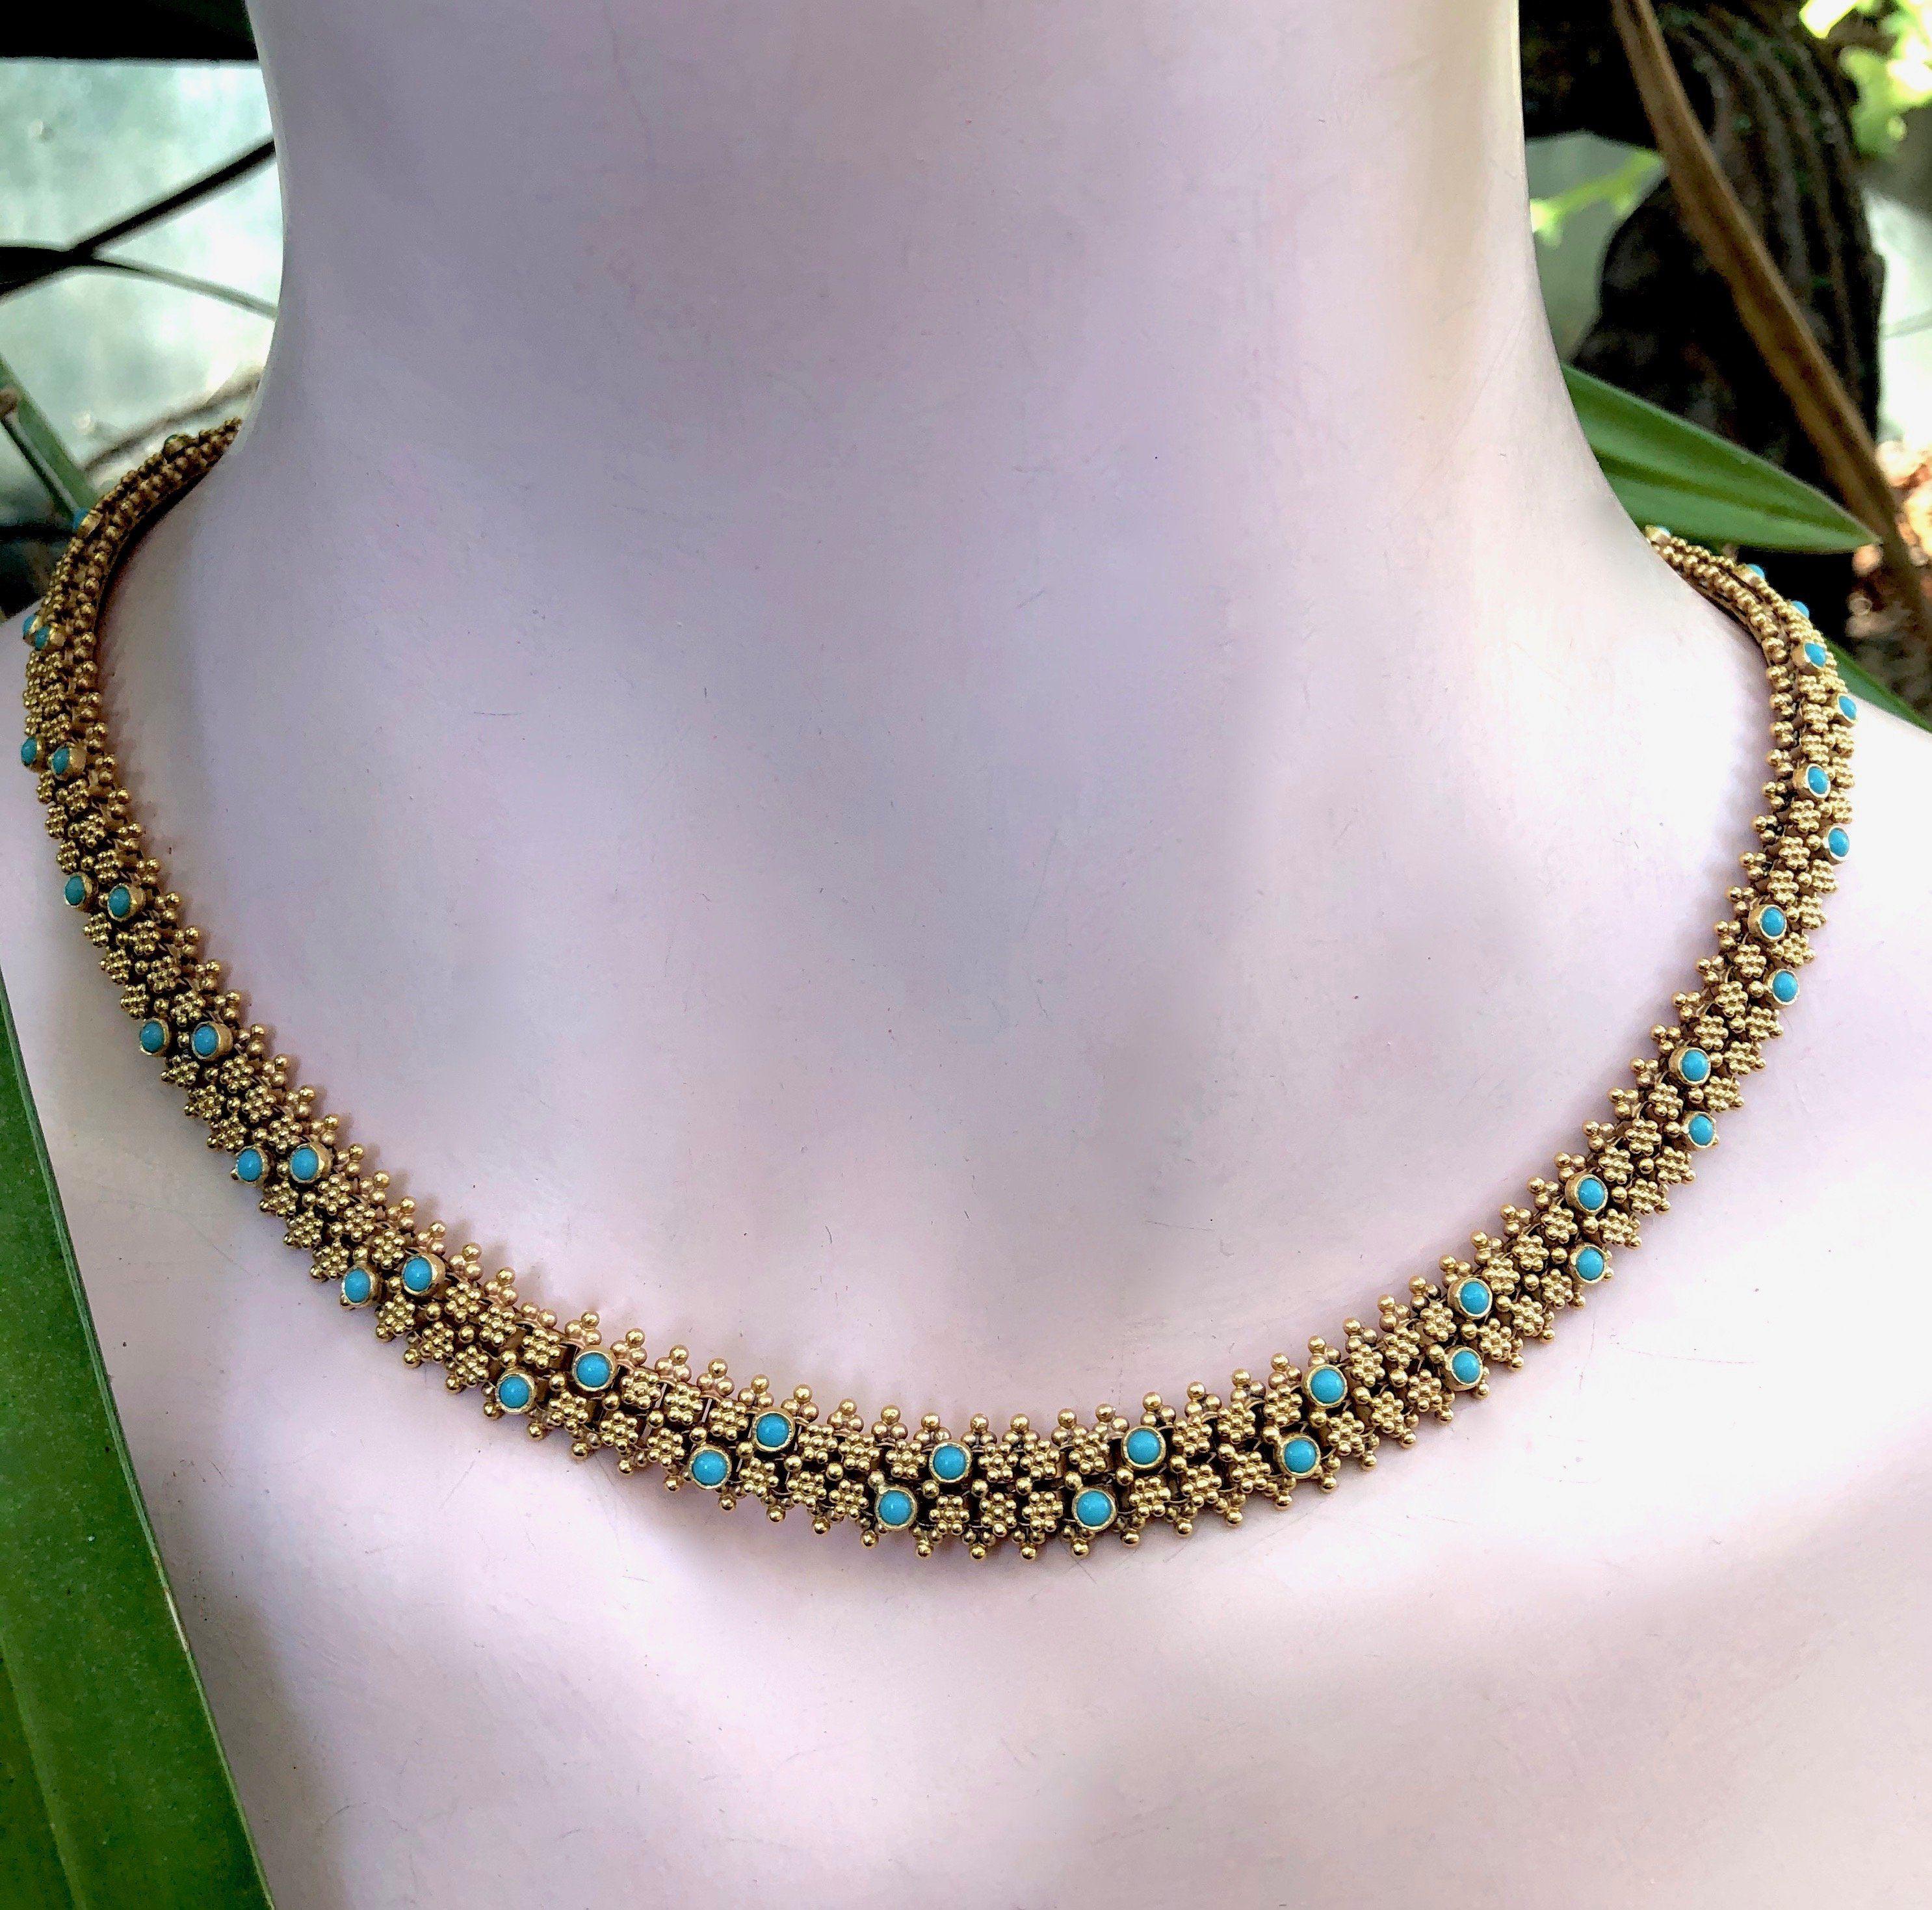 A superb Portuguese necklace with incredible cannetille gold work in 19.2 karats. The necklace has a luxurious design of heavy woven gold that glows from its high karat. It contains over 60 turquoise cabochons and has a flower-like box clasp that